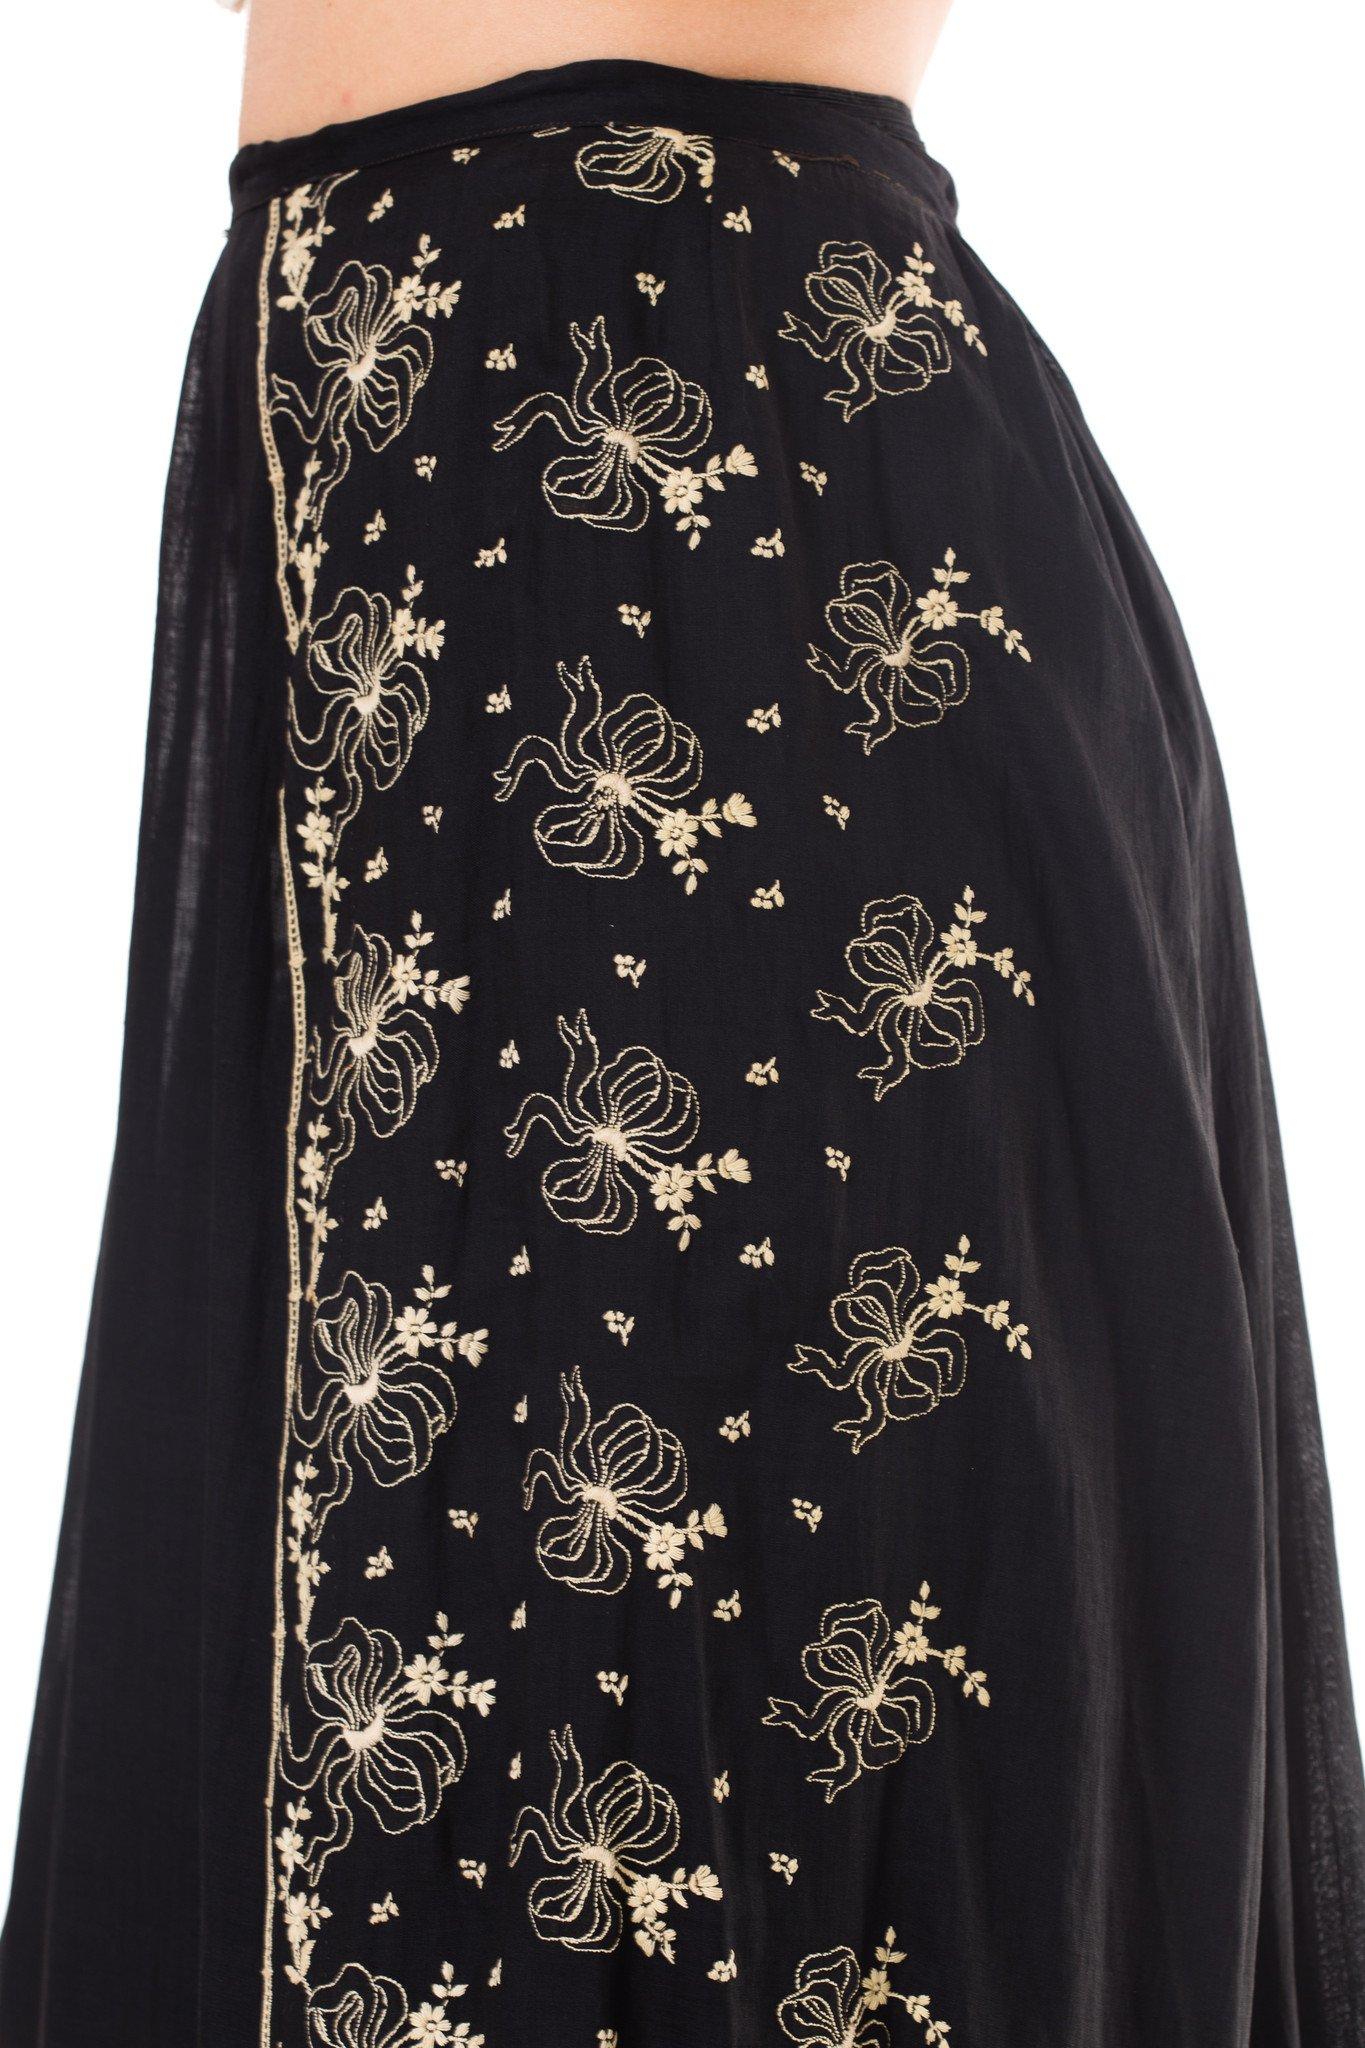 1890S  Black Victorian Cotton Sateen Skirt With Lace Style Embroidery For Sale 1